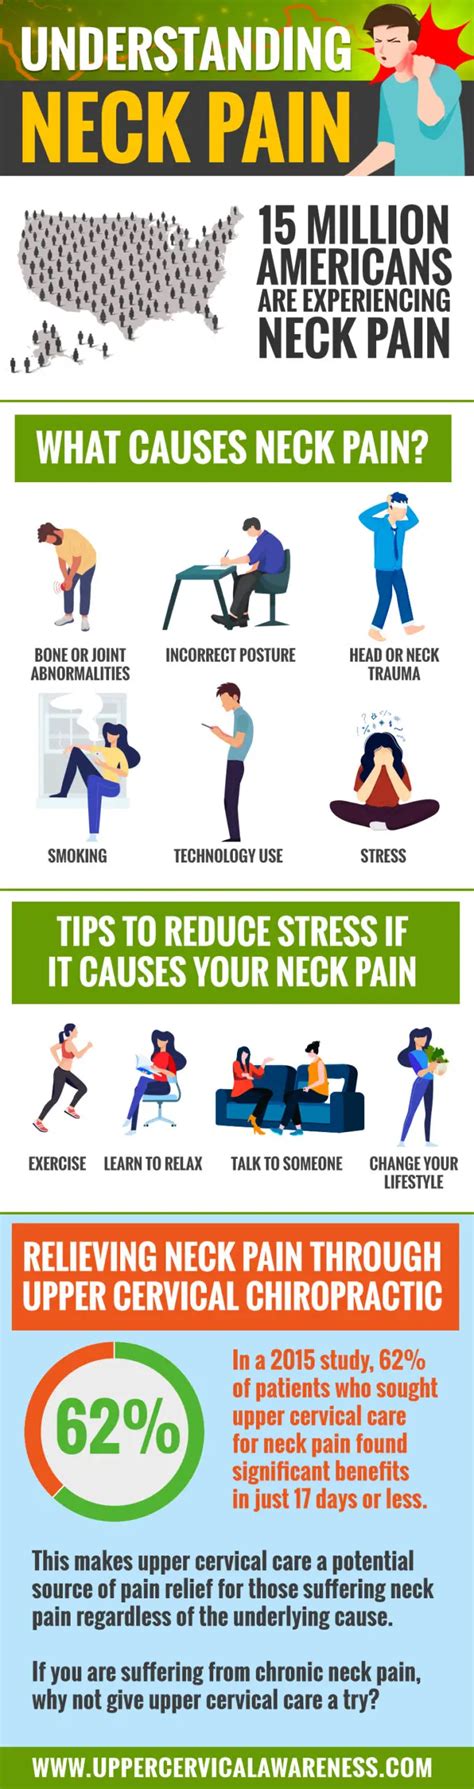 Chiropractor In Draper Explains How Neck Pain Works